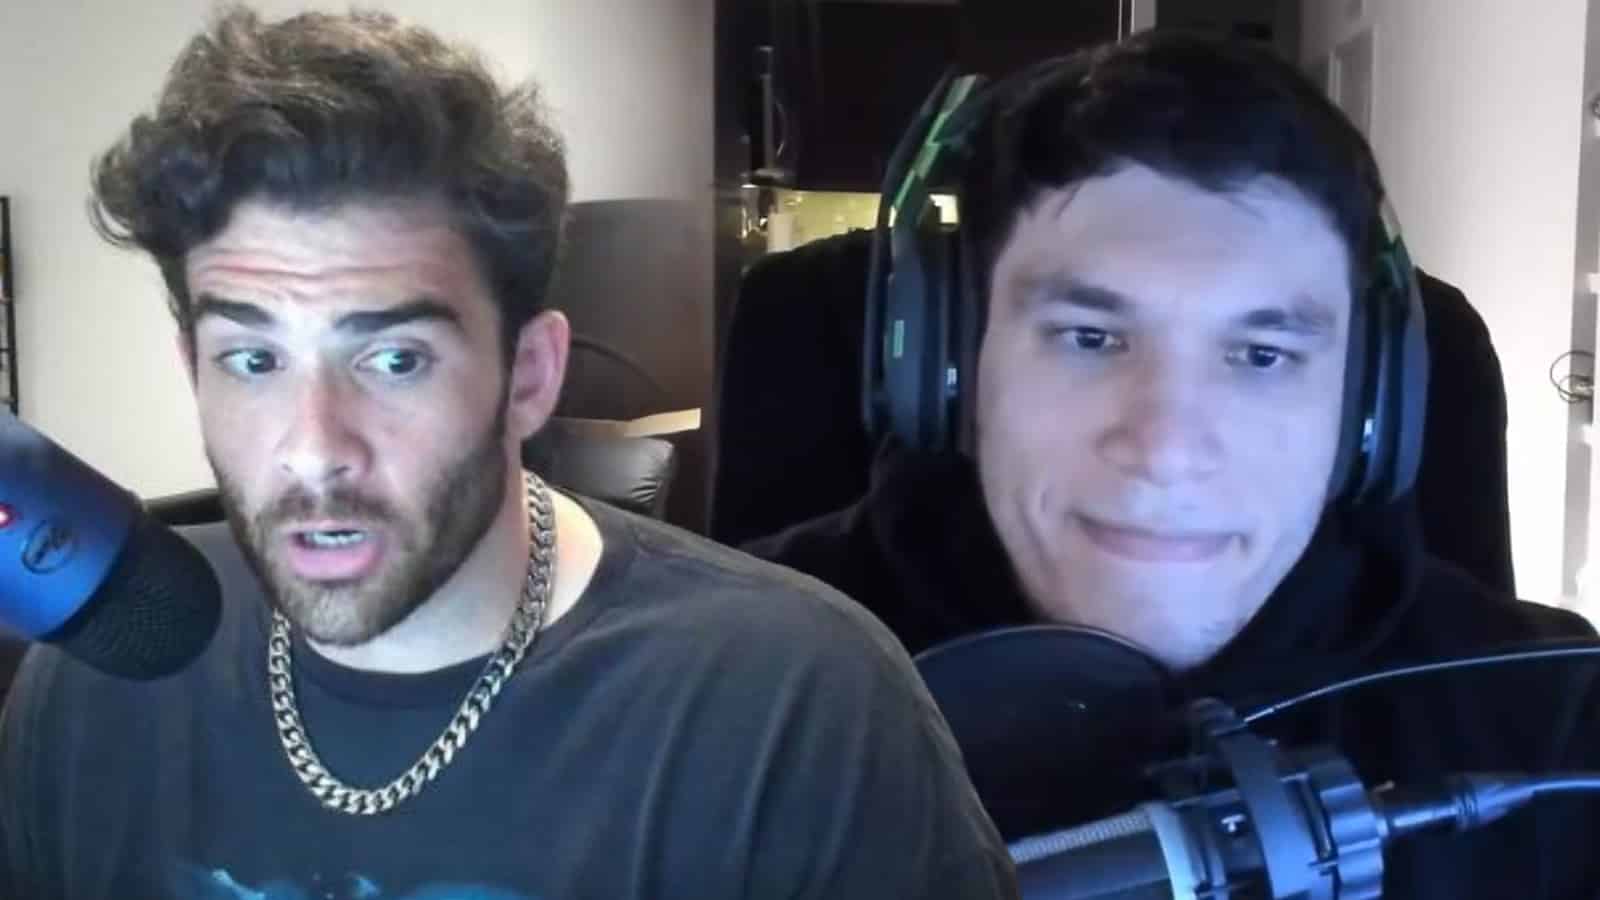 Hasan claims "degenerate" Trainwrecks is addicted to Twitch gambling streams